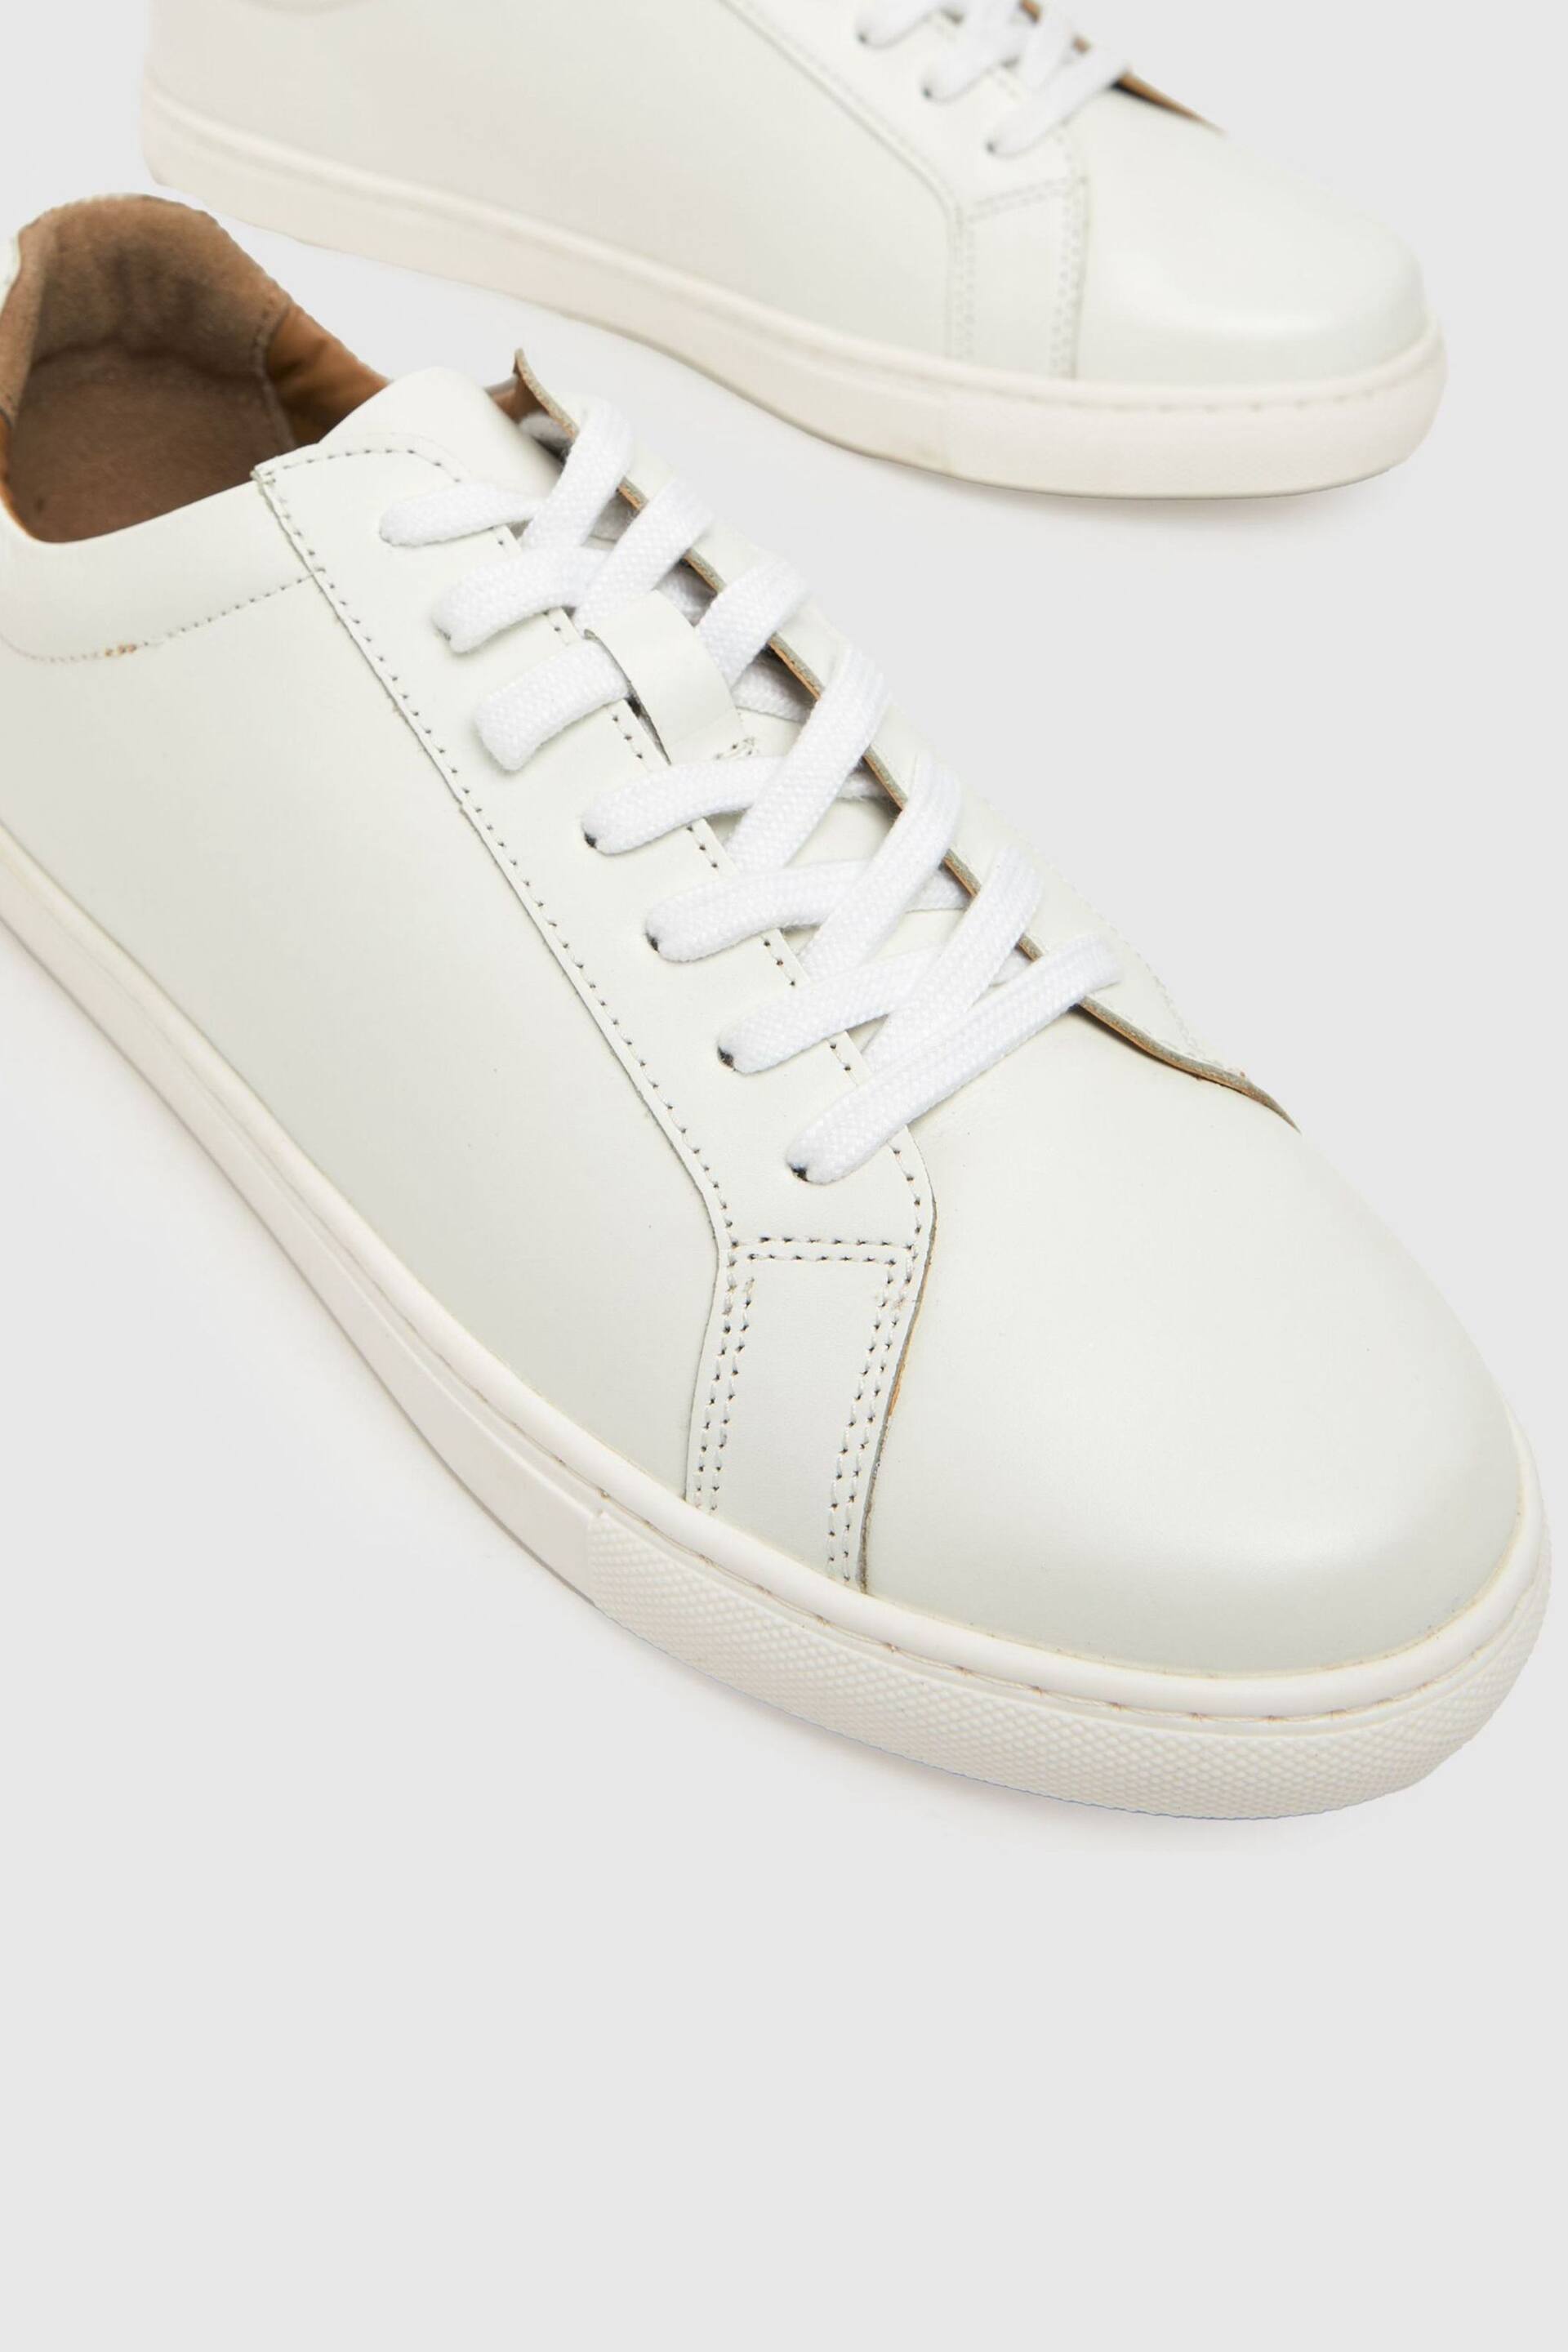 Schuh Wayne Leather Trainers - Image 3 of 4